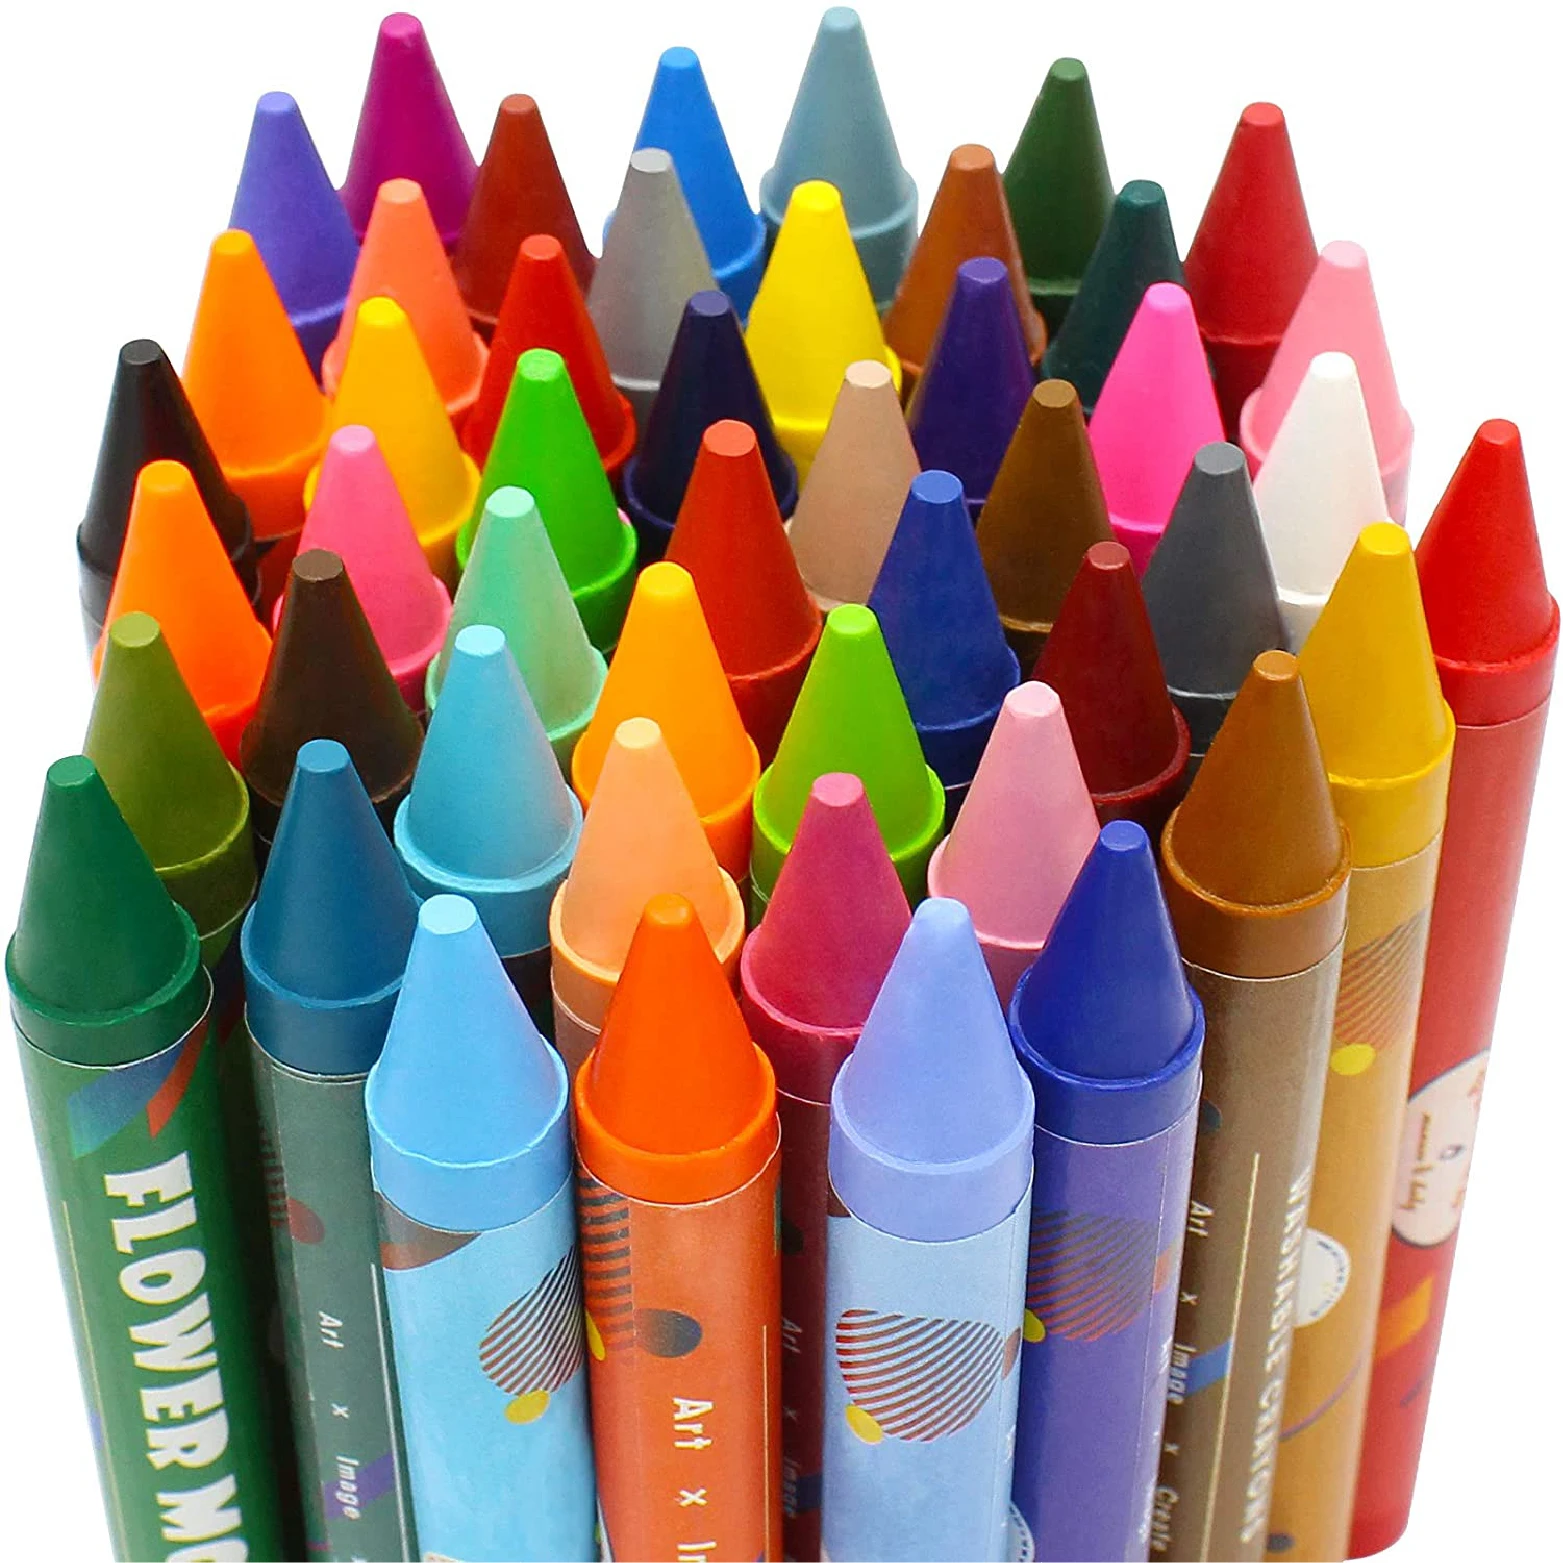  ZY-Wisdom 12 Colour Drop Crayons For Toddlers, Non